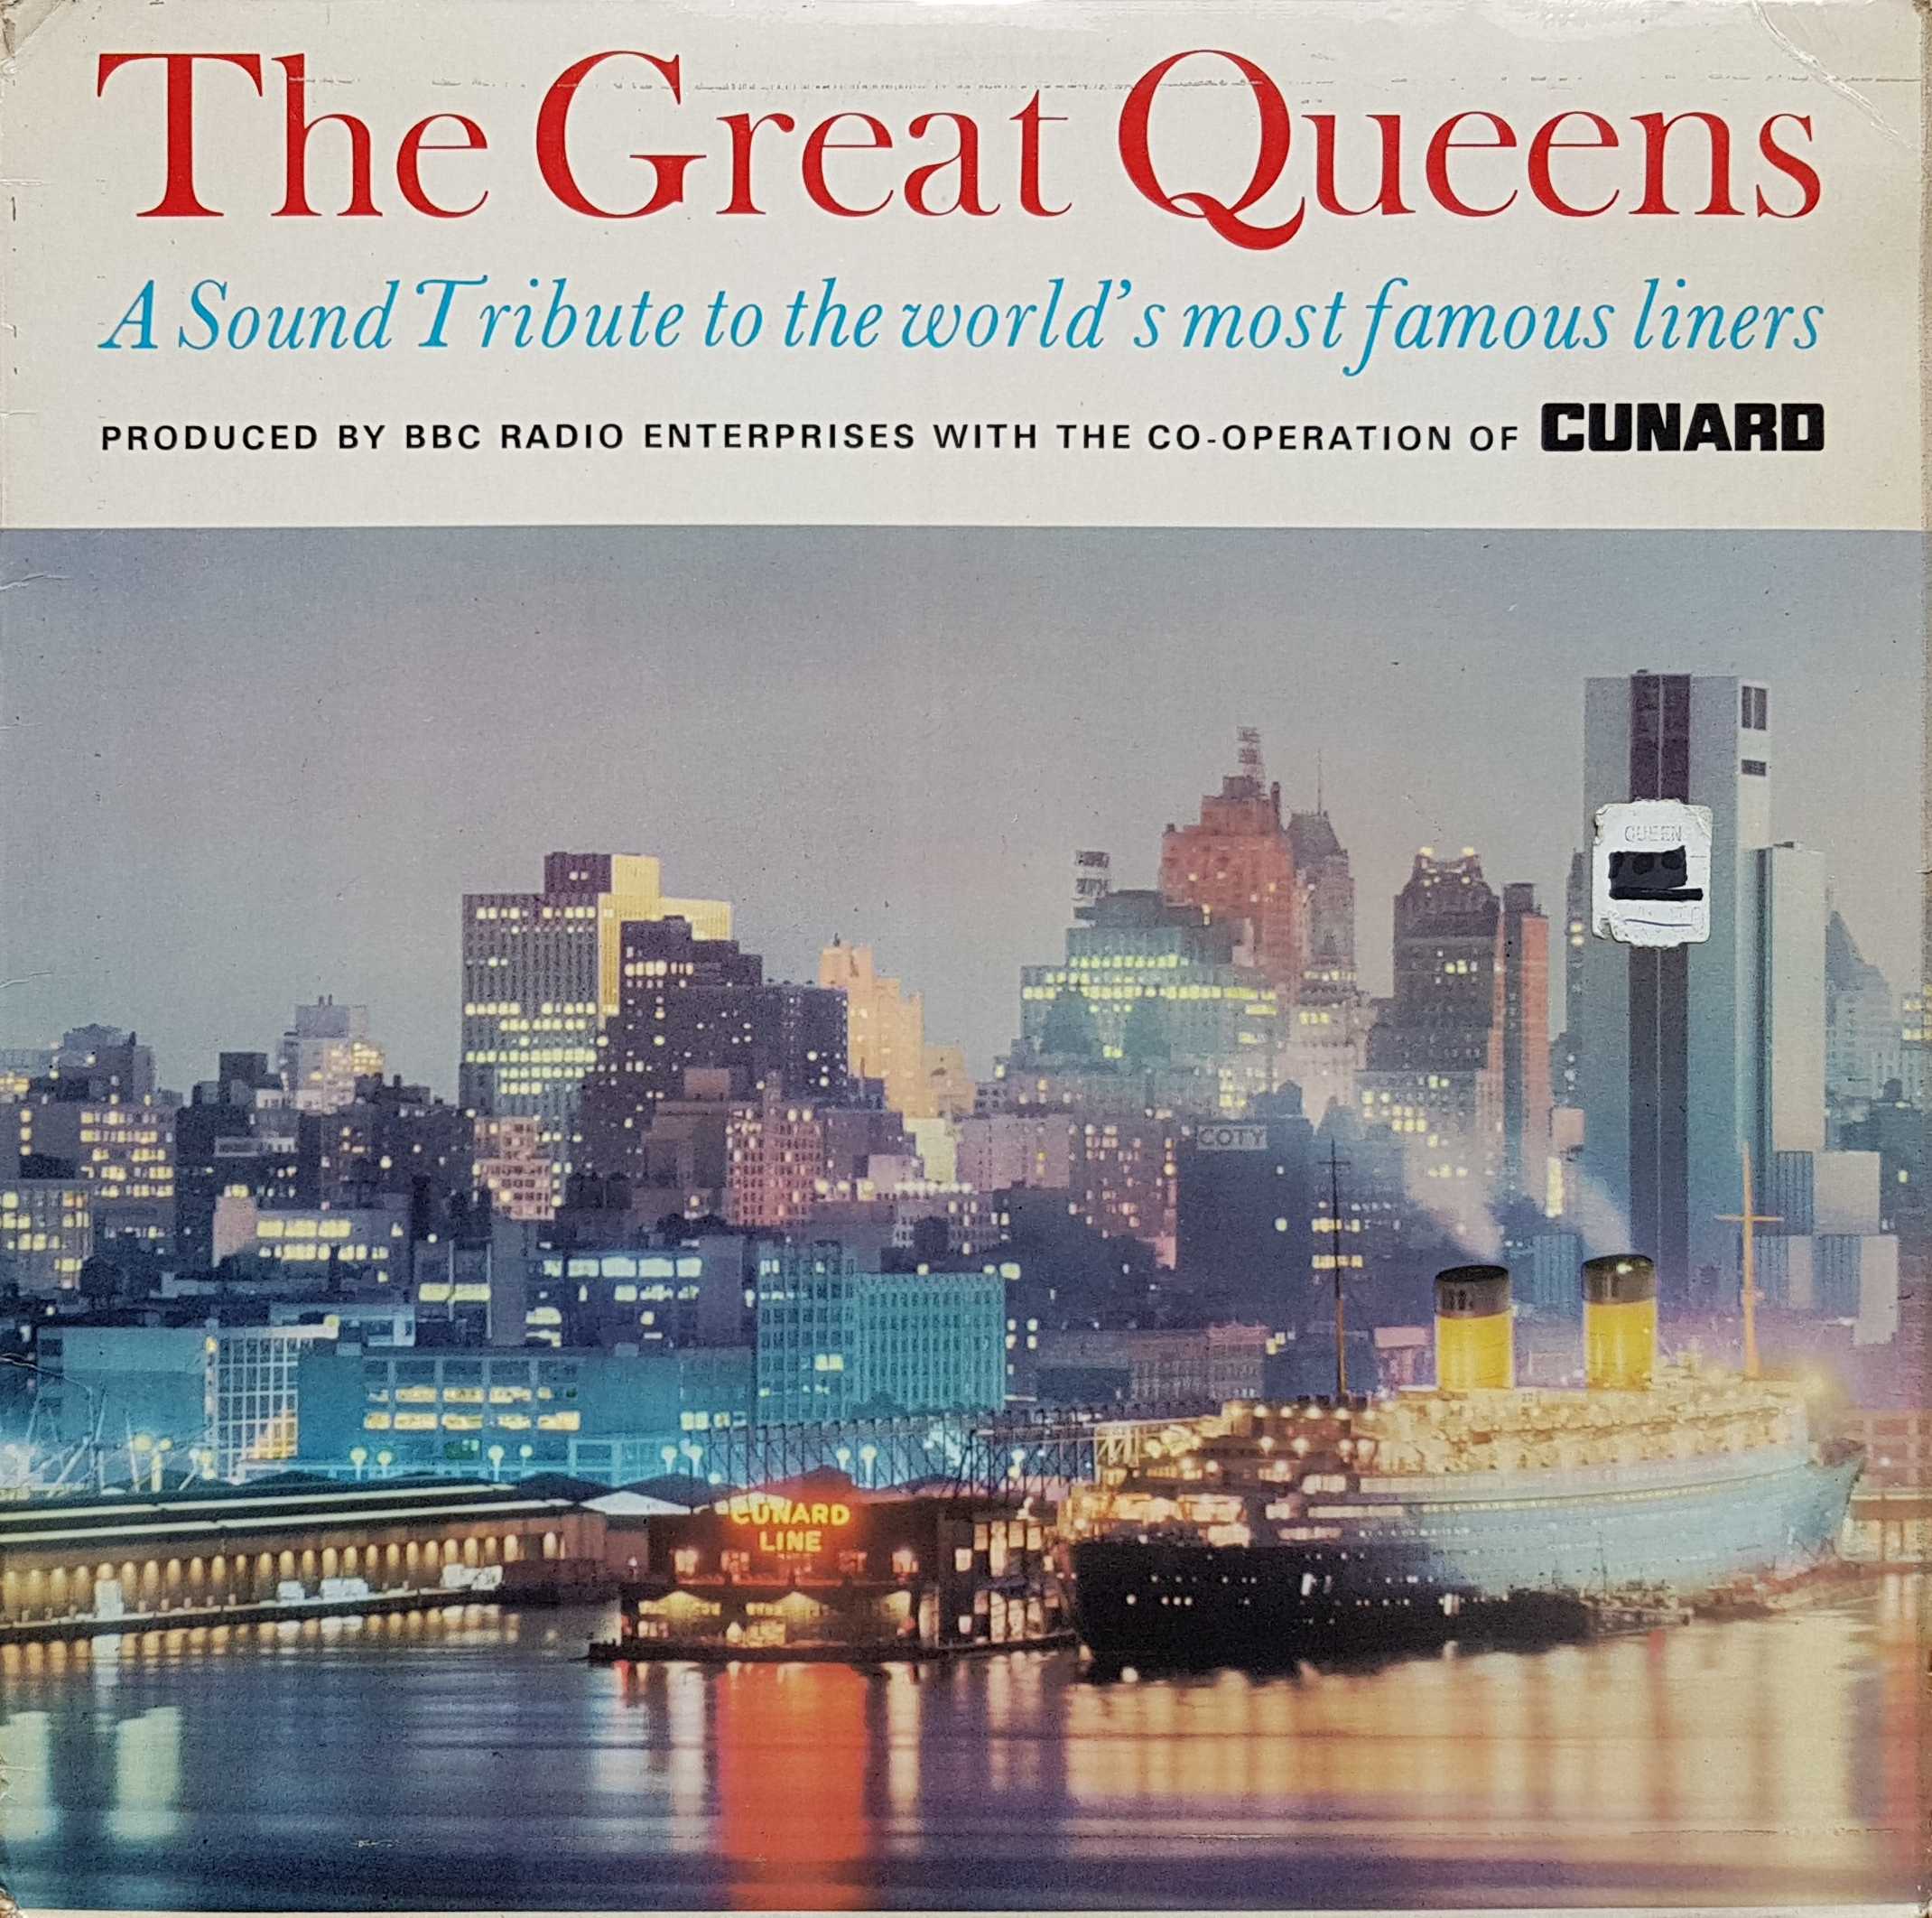 Picture of RE 8 The great Queens - A sound tribute to the World's most famous liners by artist Robert Stannage from the BBC albums - Records and Tapes library